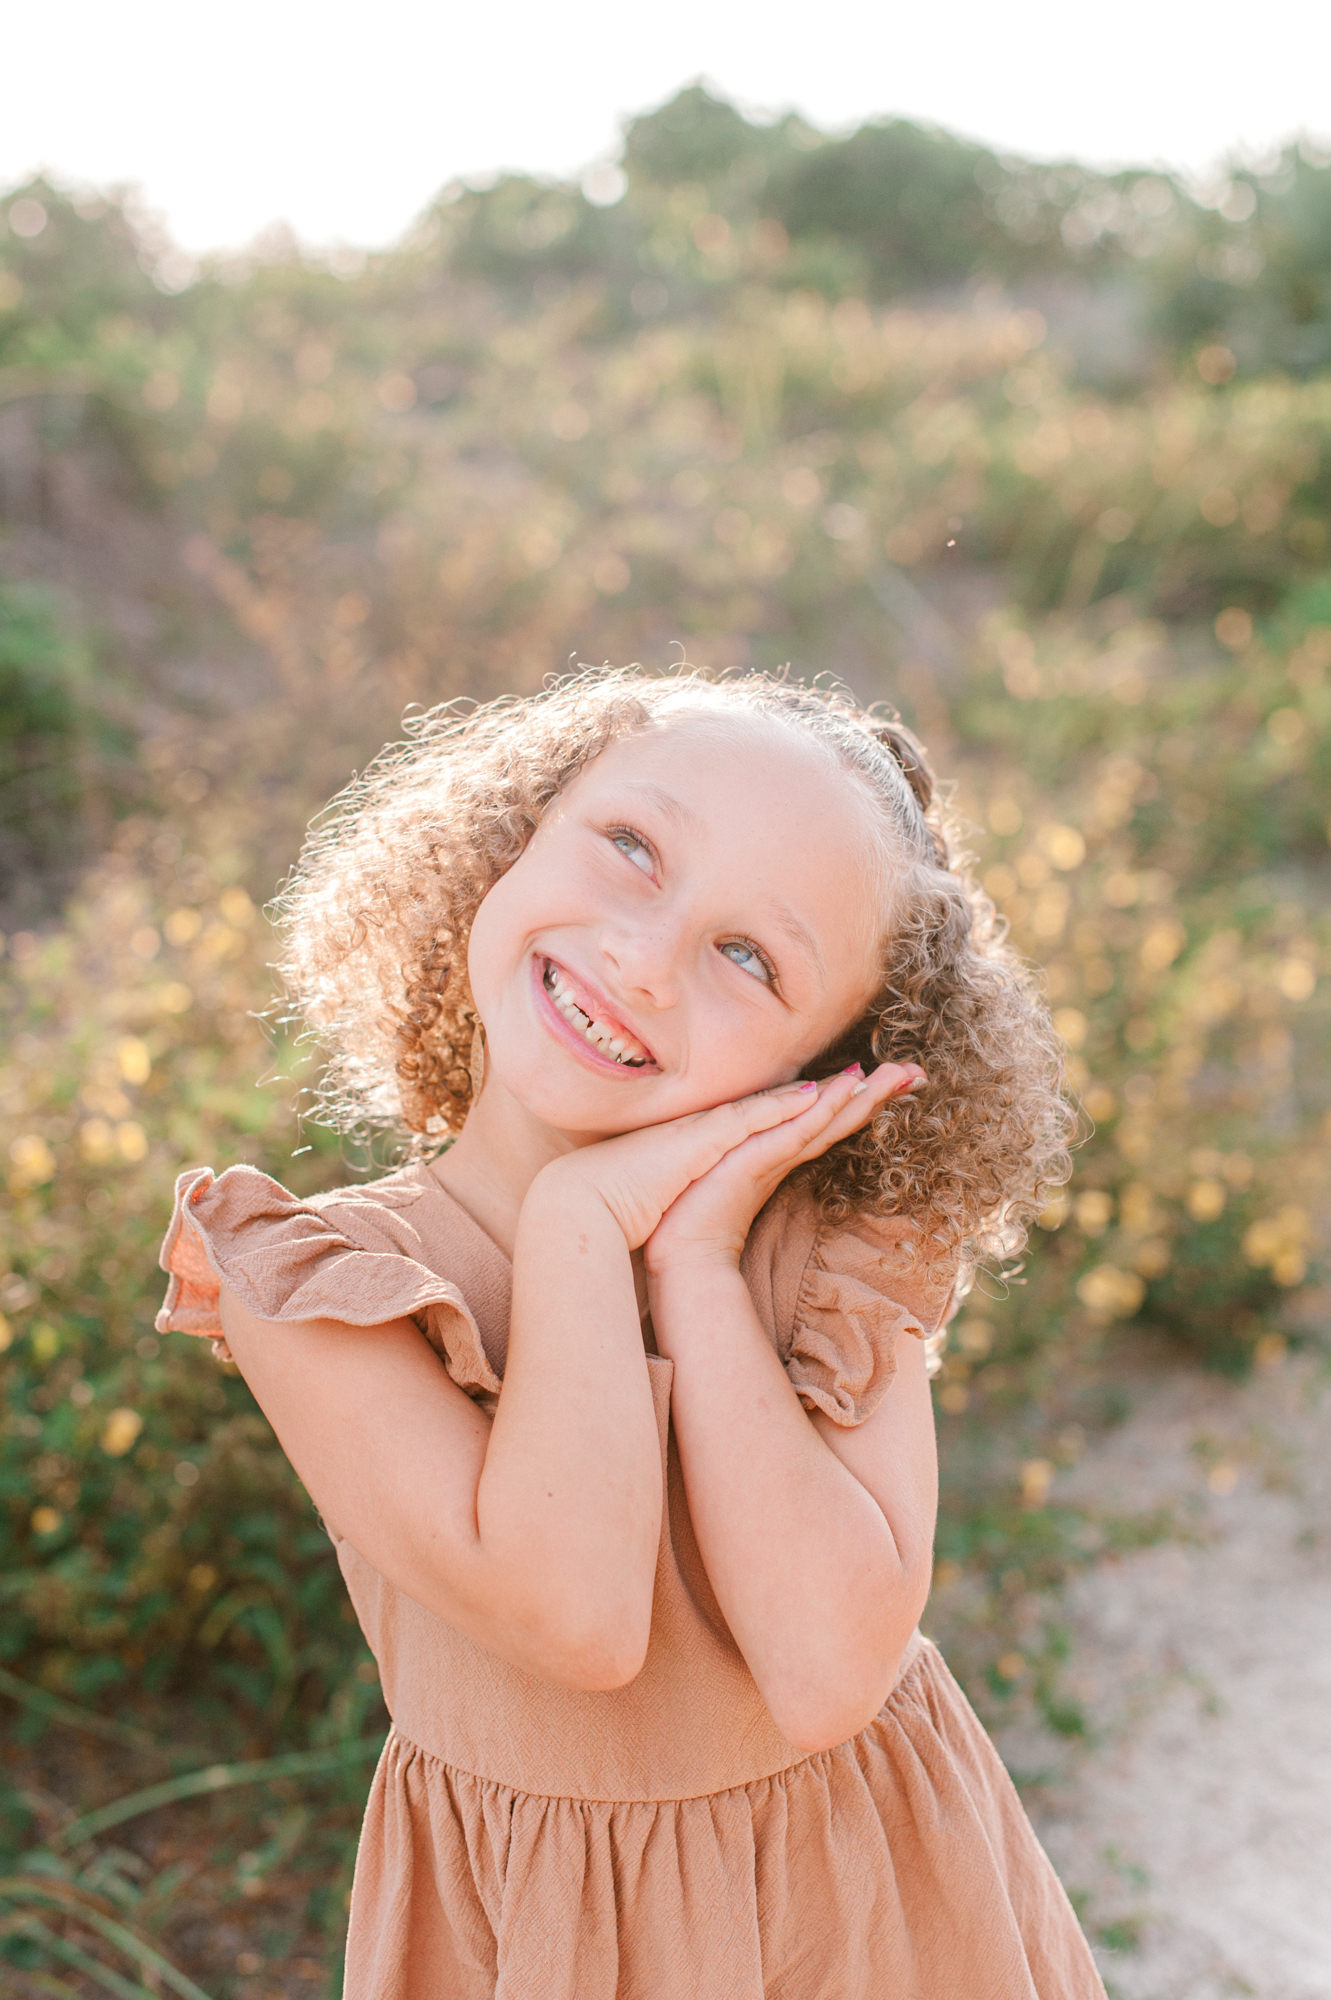 Adorable close-up of a little girl smiling with her hands on her cheek smiling up a the sky